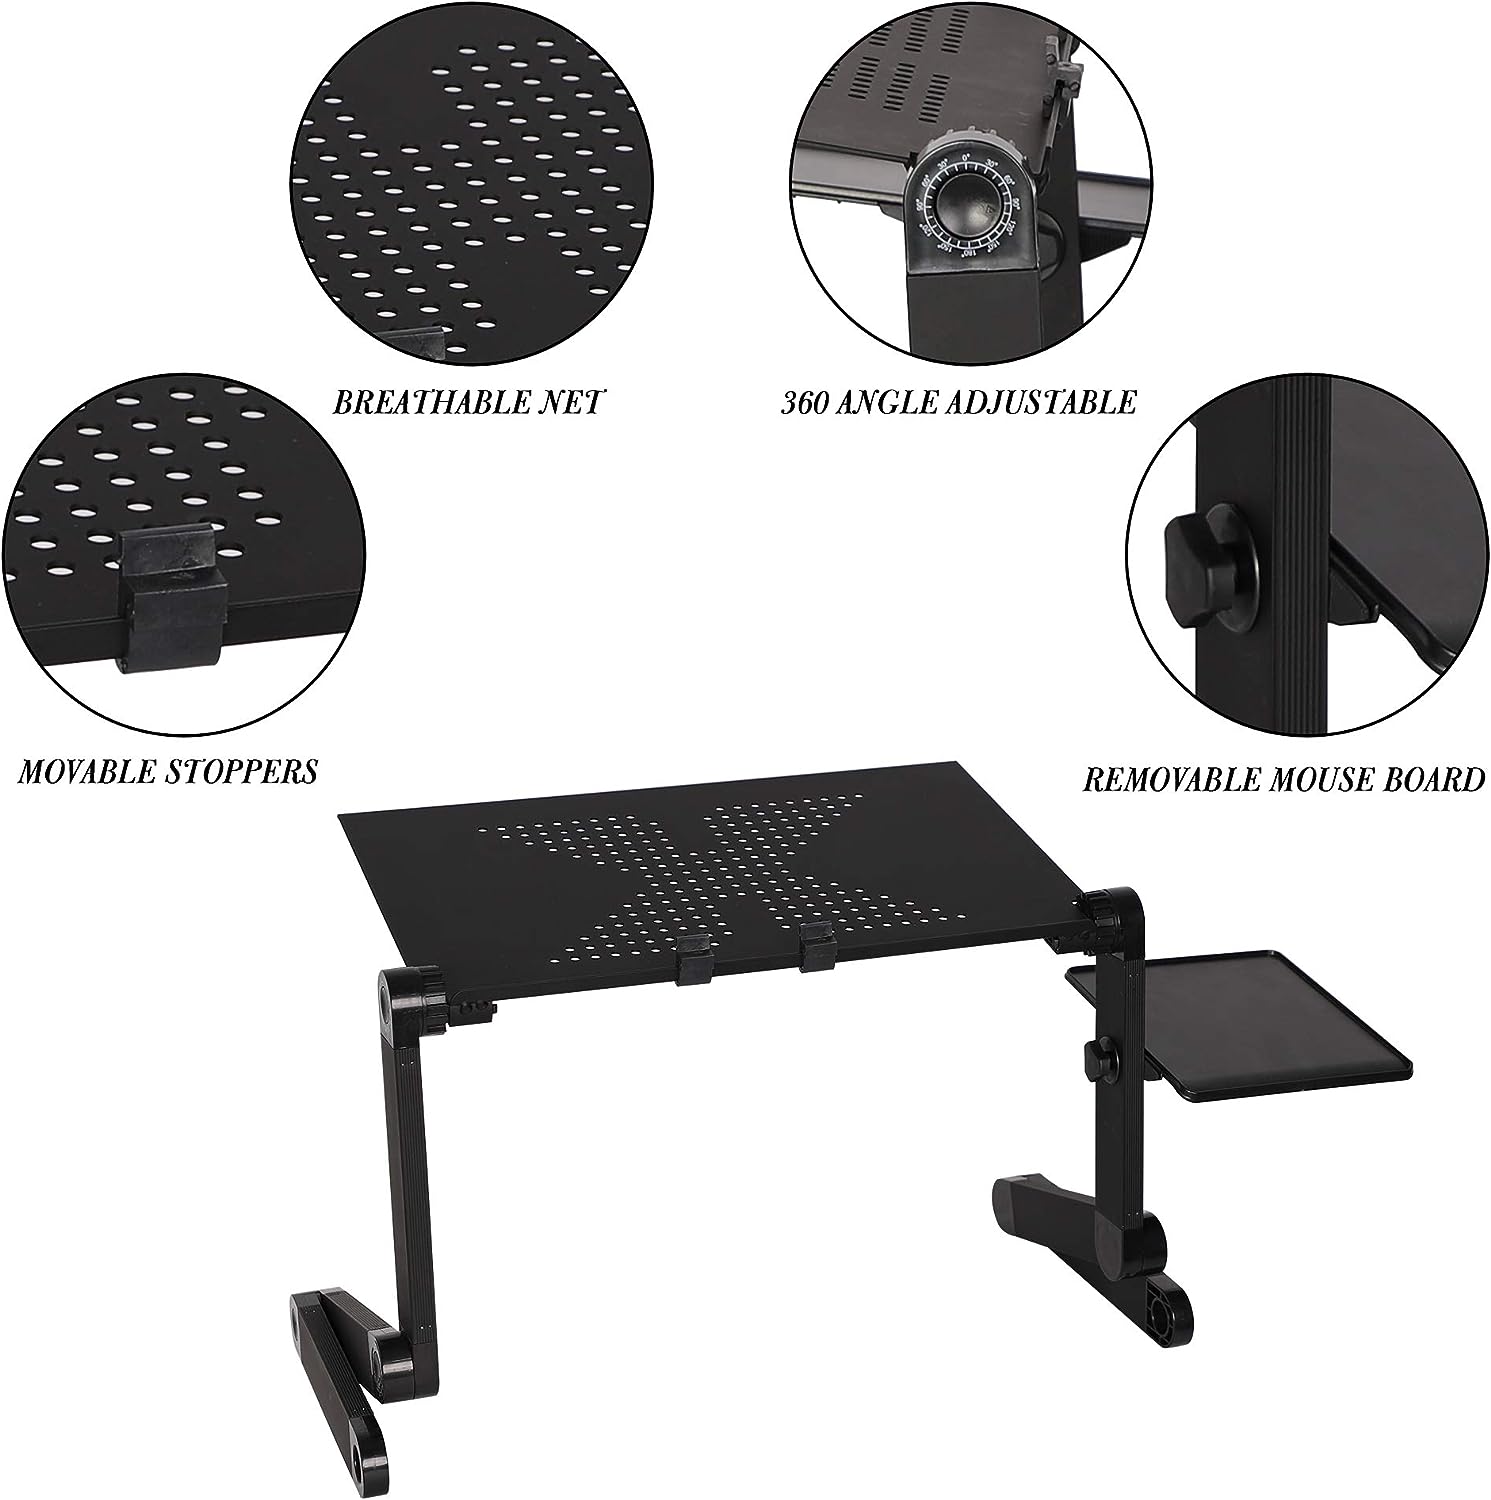 Adjustable Laptop Stand with Heat Emission Hole and Detachable Mouse Pad Portable Folding Laptop Table Up to 17"